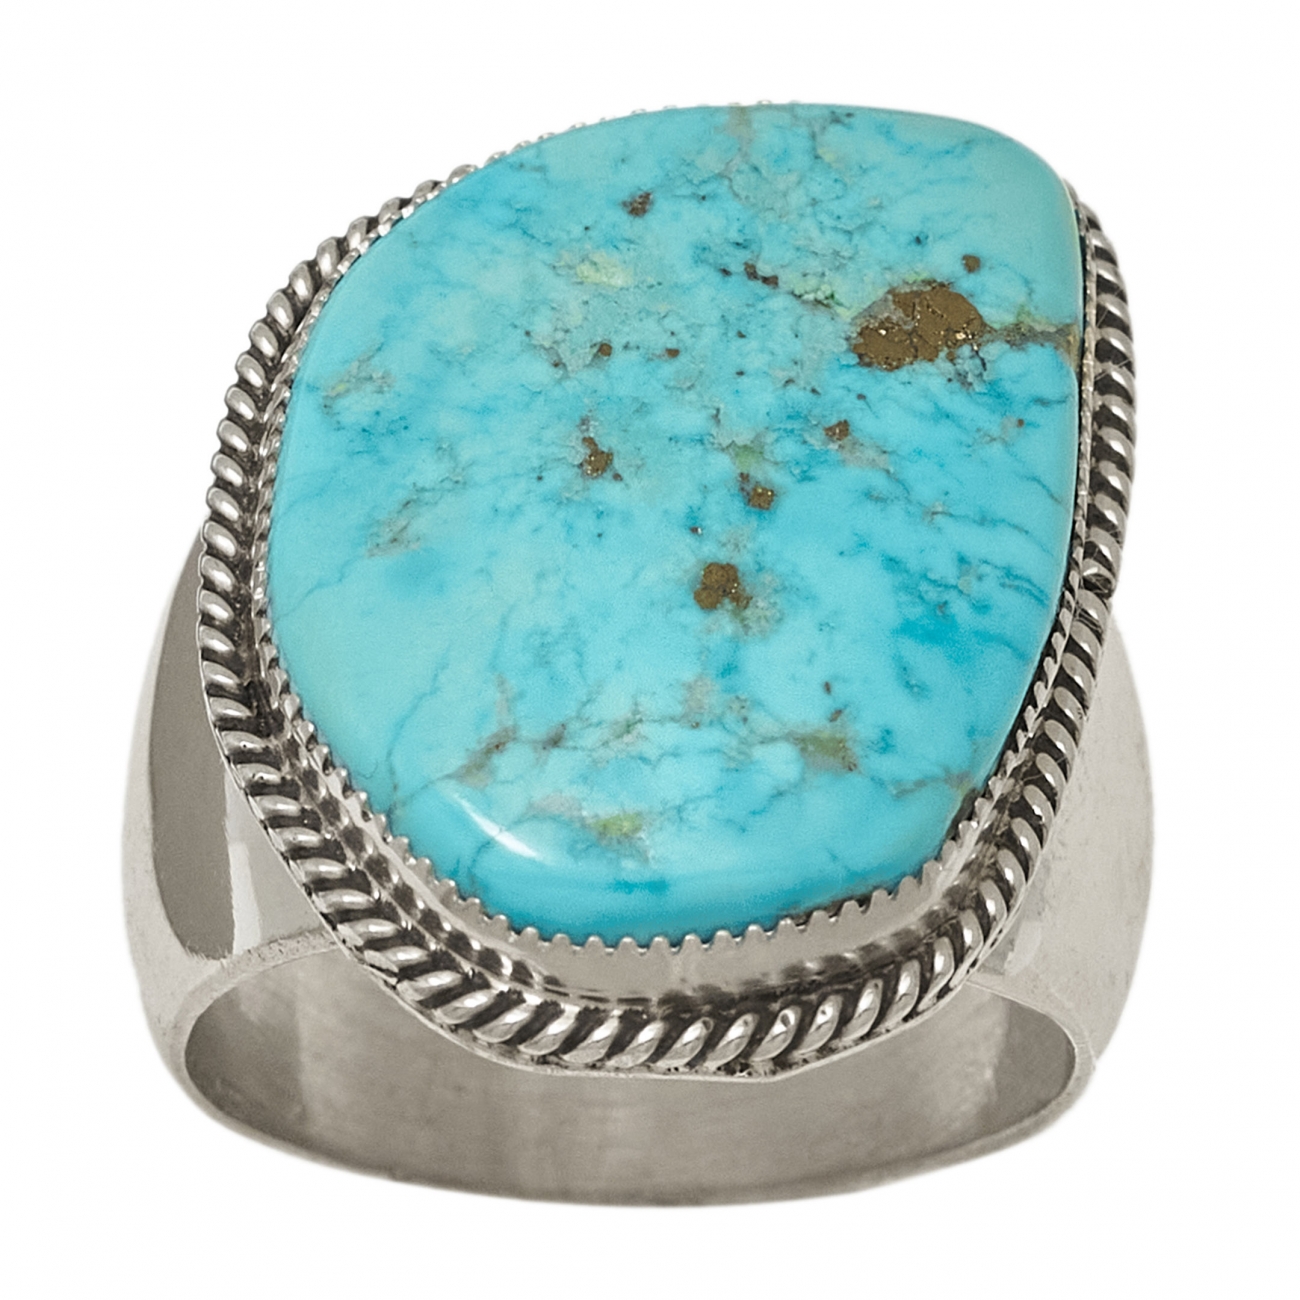 Men ring BA1305 in turquoise and silver - Harpo Paris